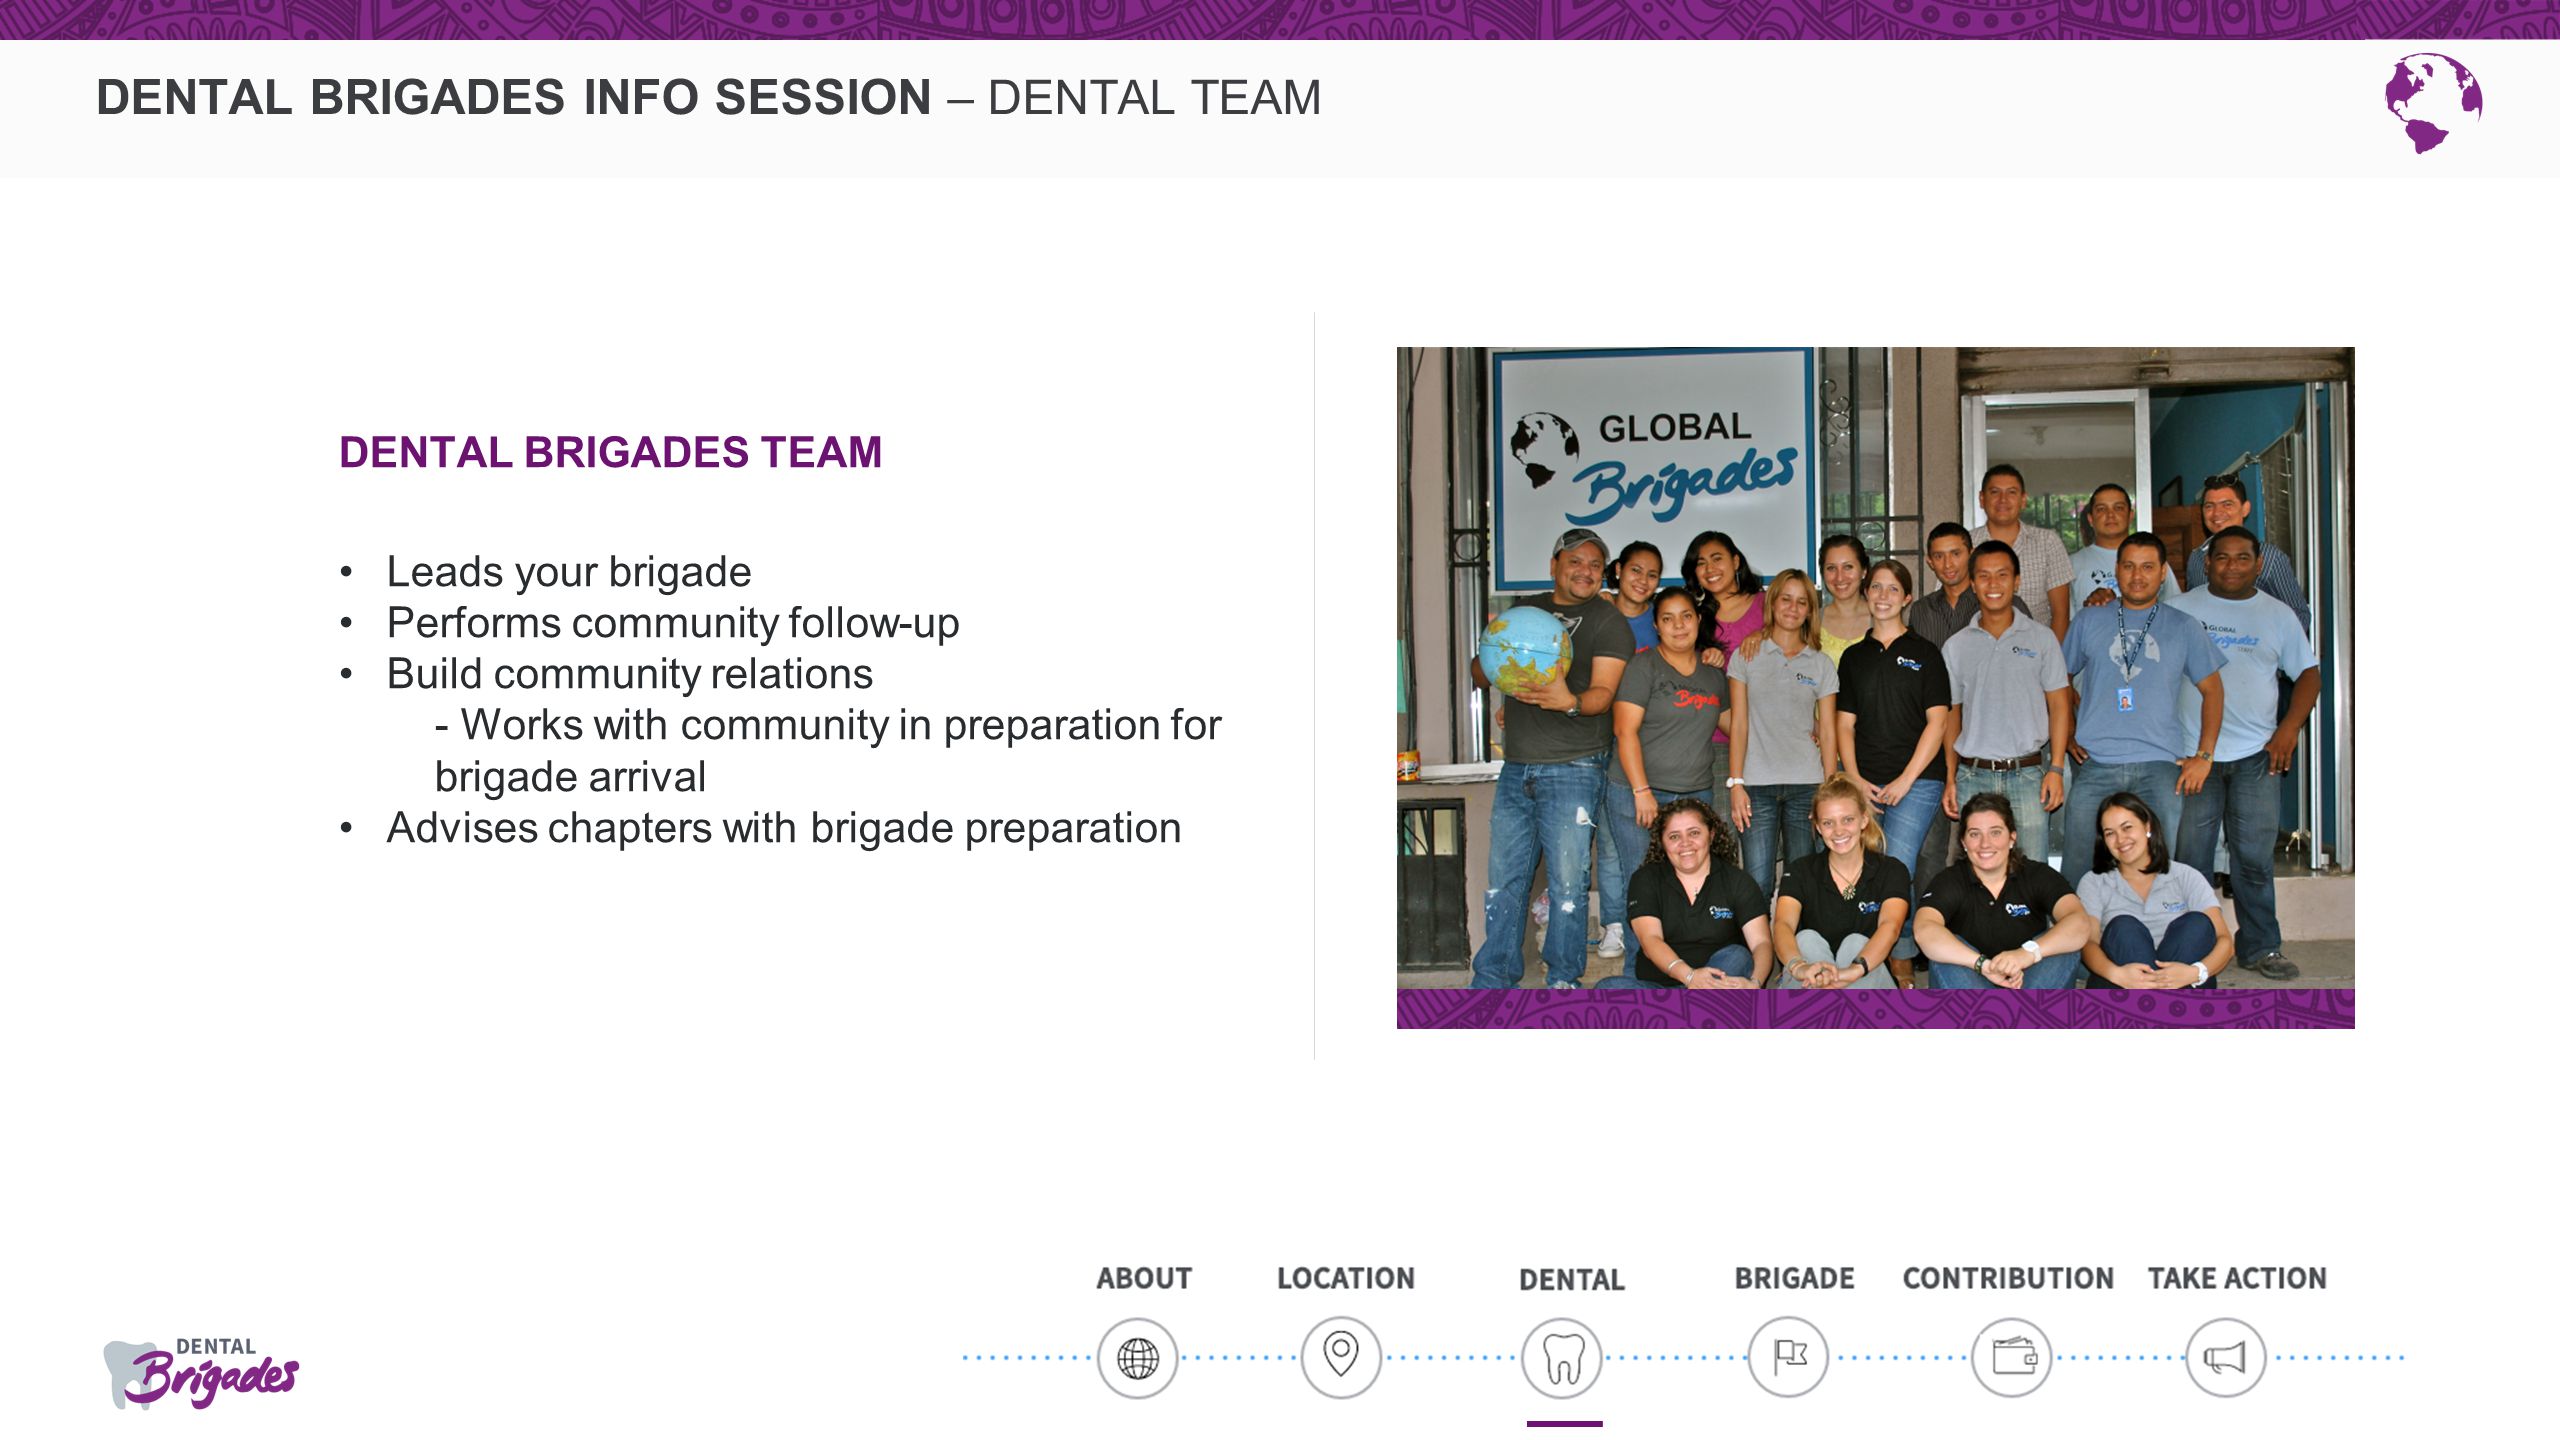 DENTAL BRIGADES INFO SESSION – DENTAL TEAM DENTAL BRIGADES TEAM Leads your brigade Performs community follow-up Build community relations - Works with community in preparation for brigade arrival Advises chapters with brigade preparation